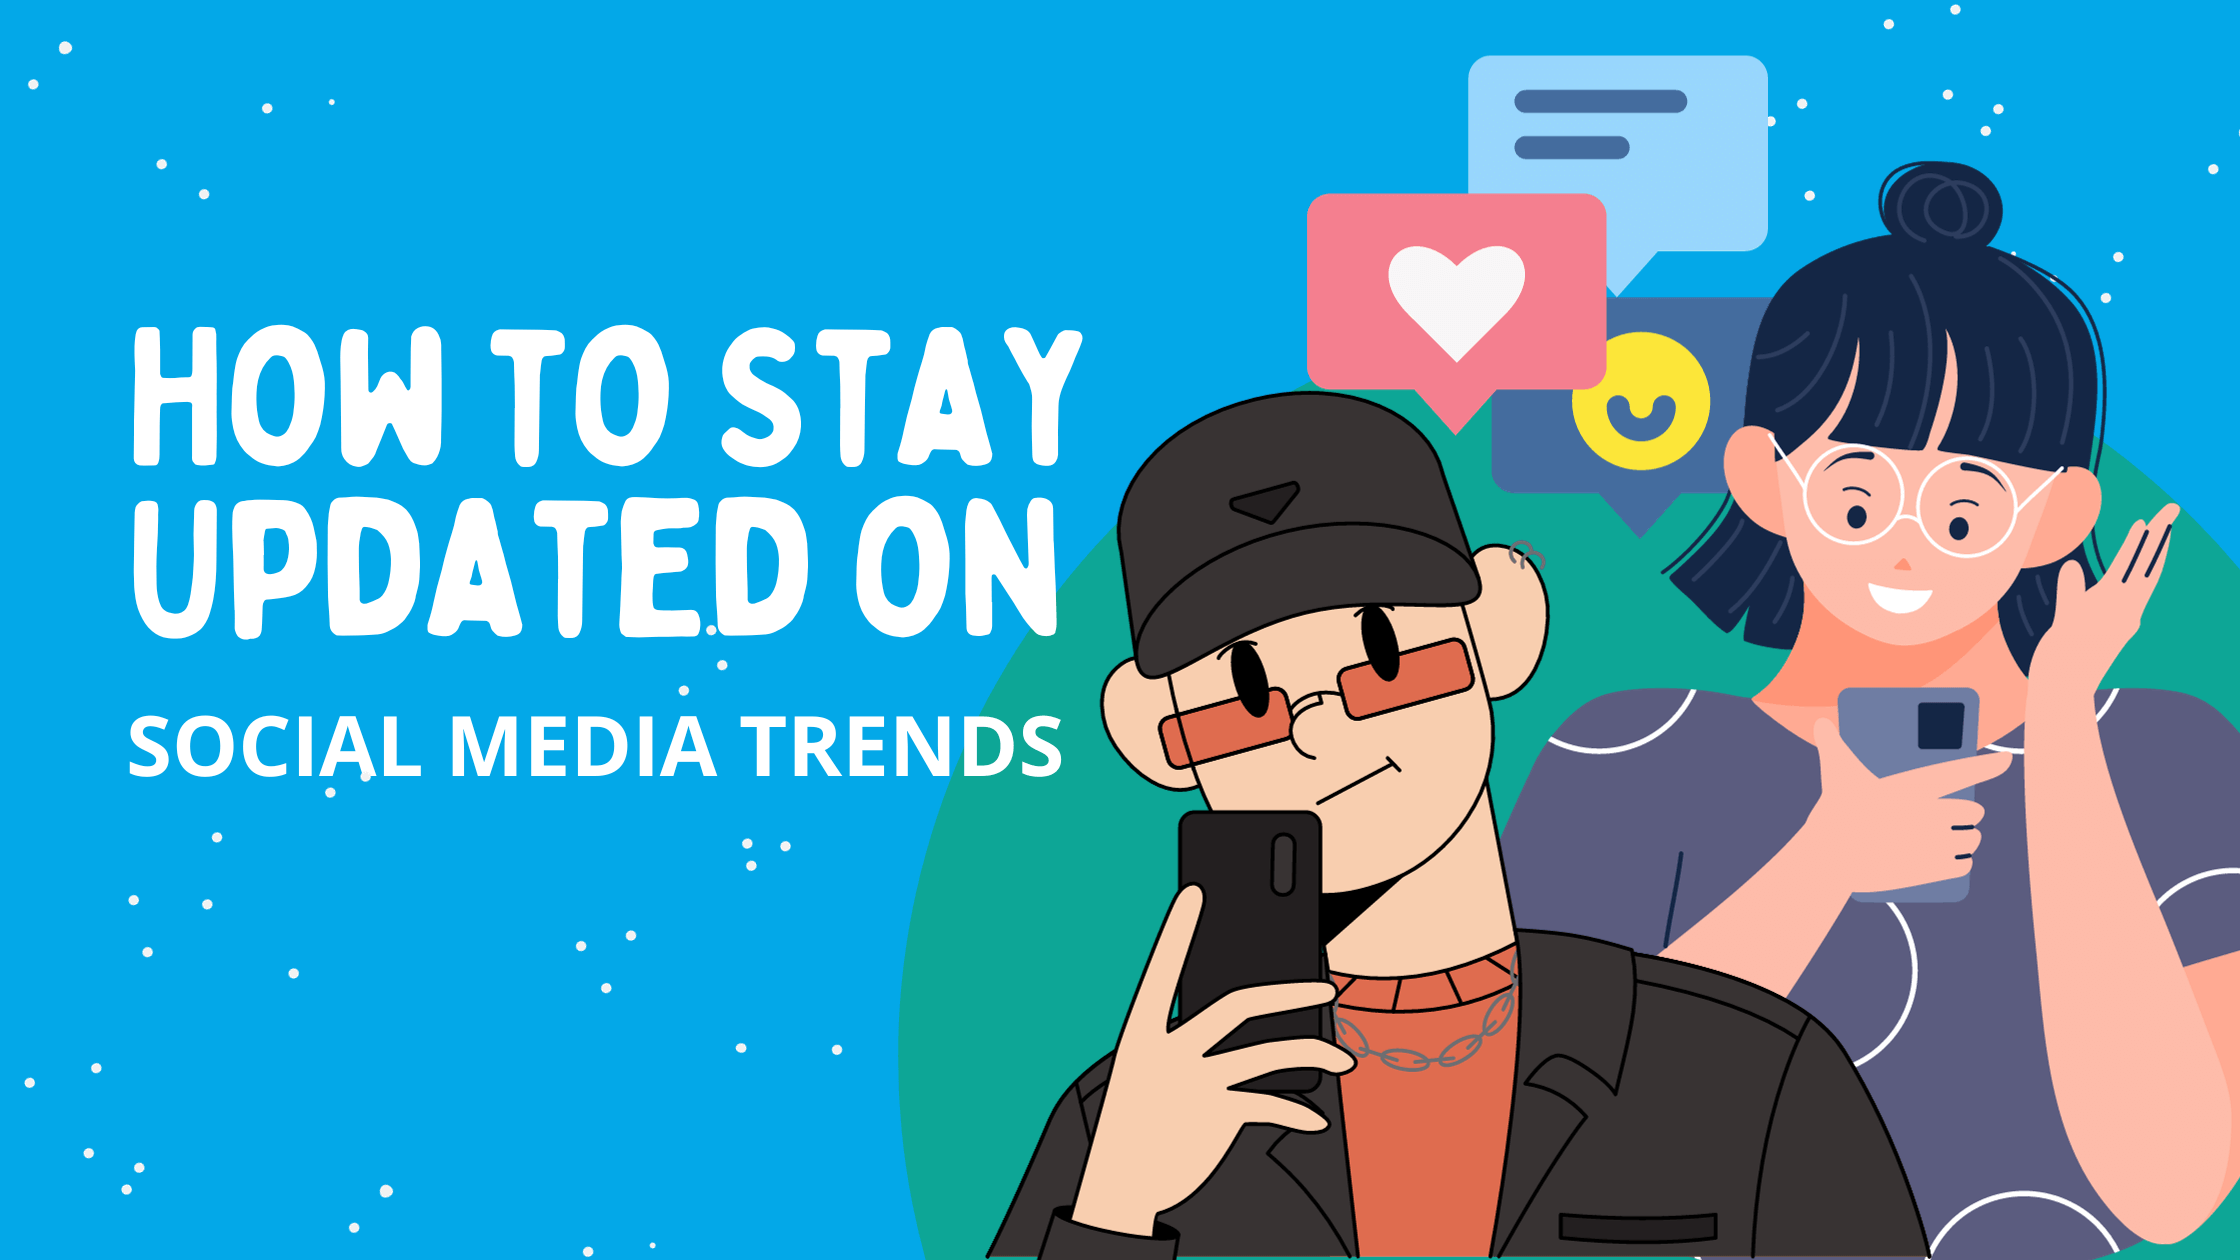 How to Stay Updated on Social Media Trends